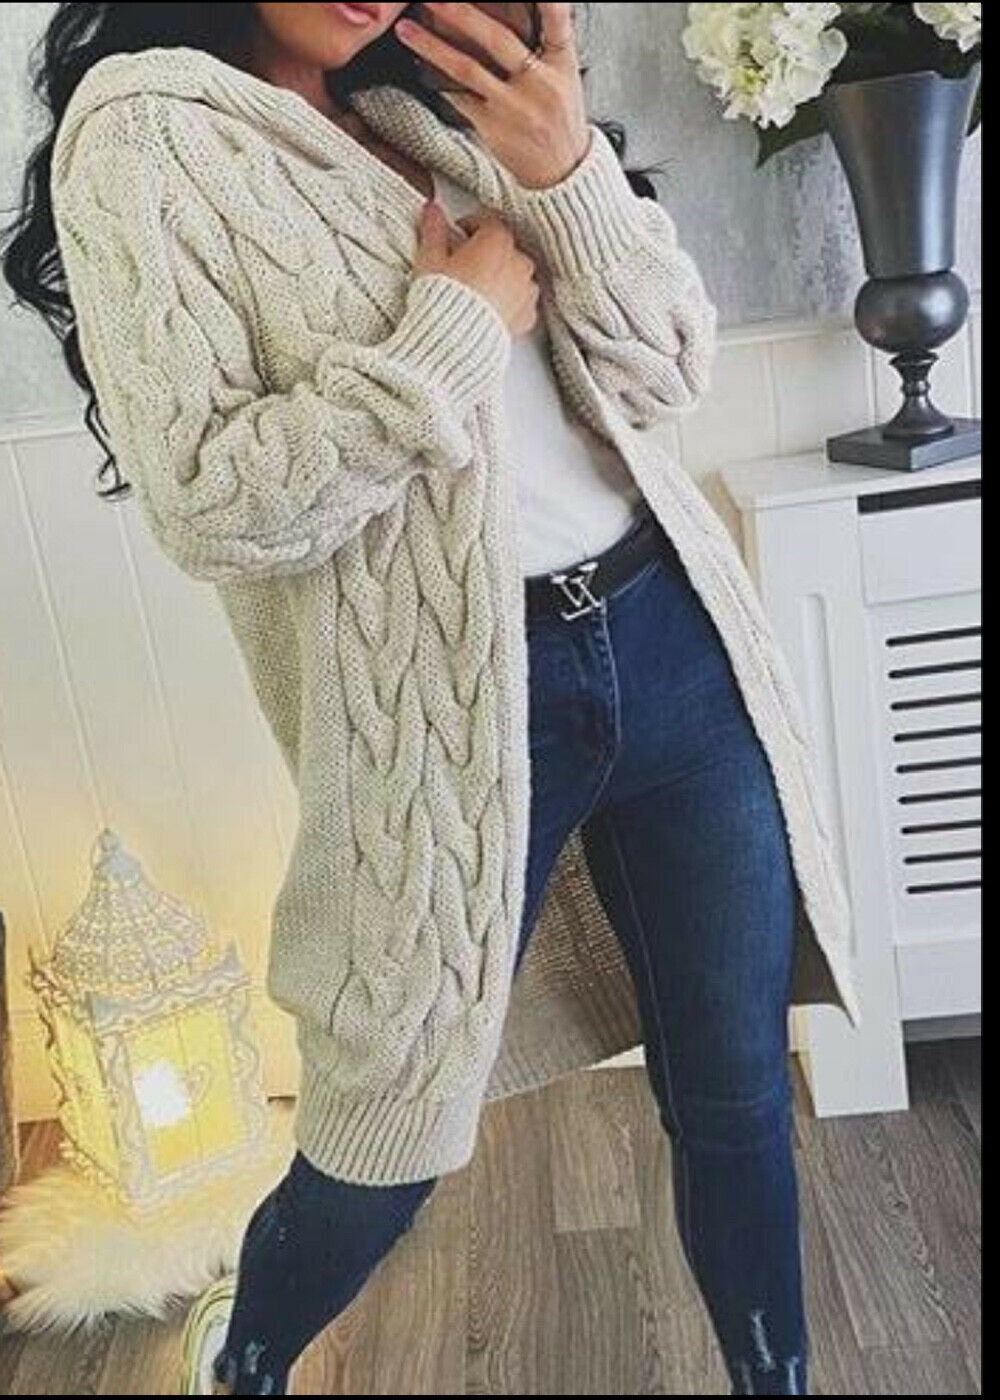 Women's Chunky Cable Knitted Oversized Longline Hooded | Etsy